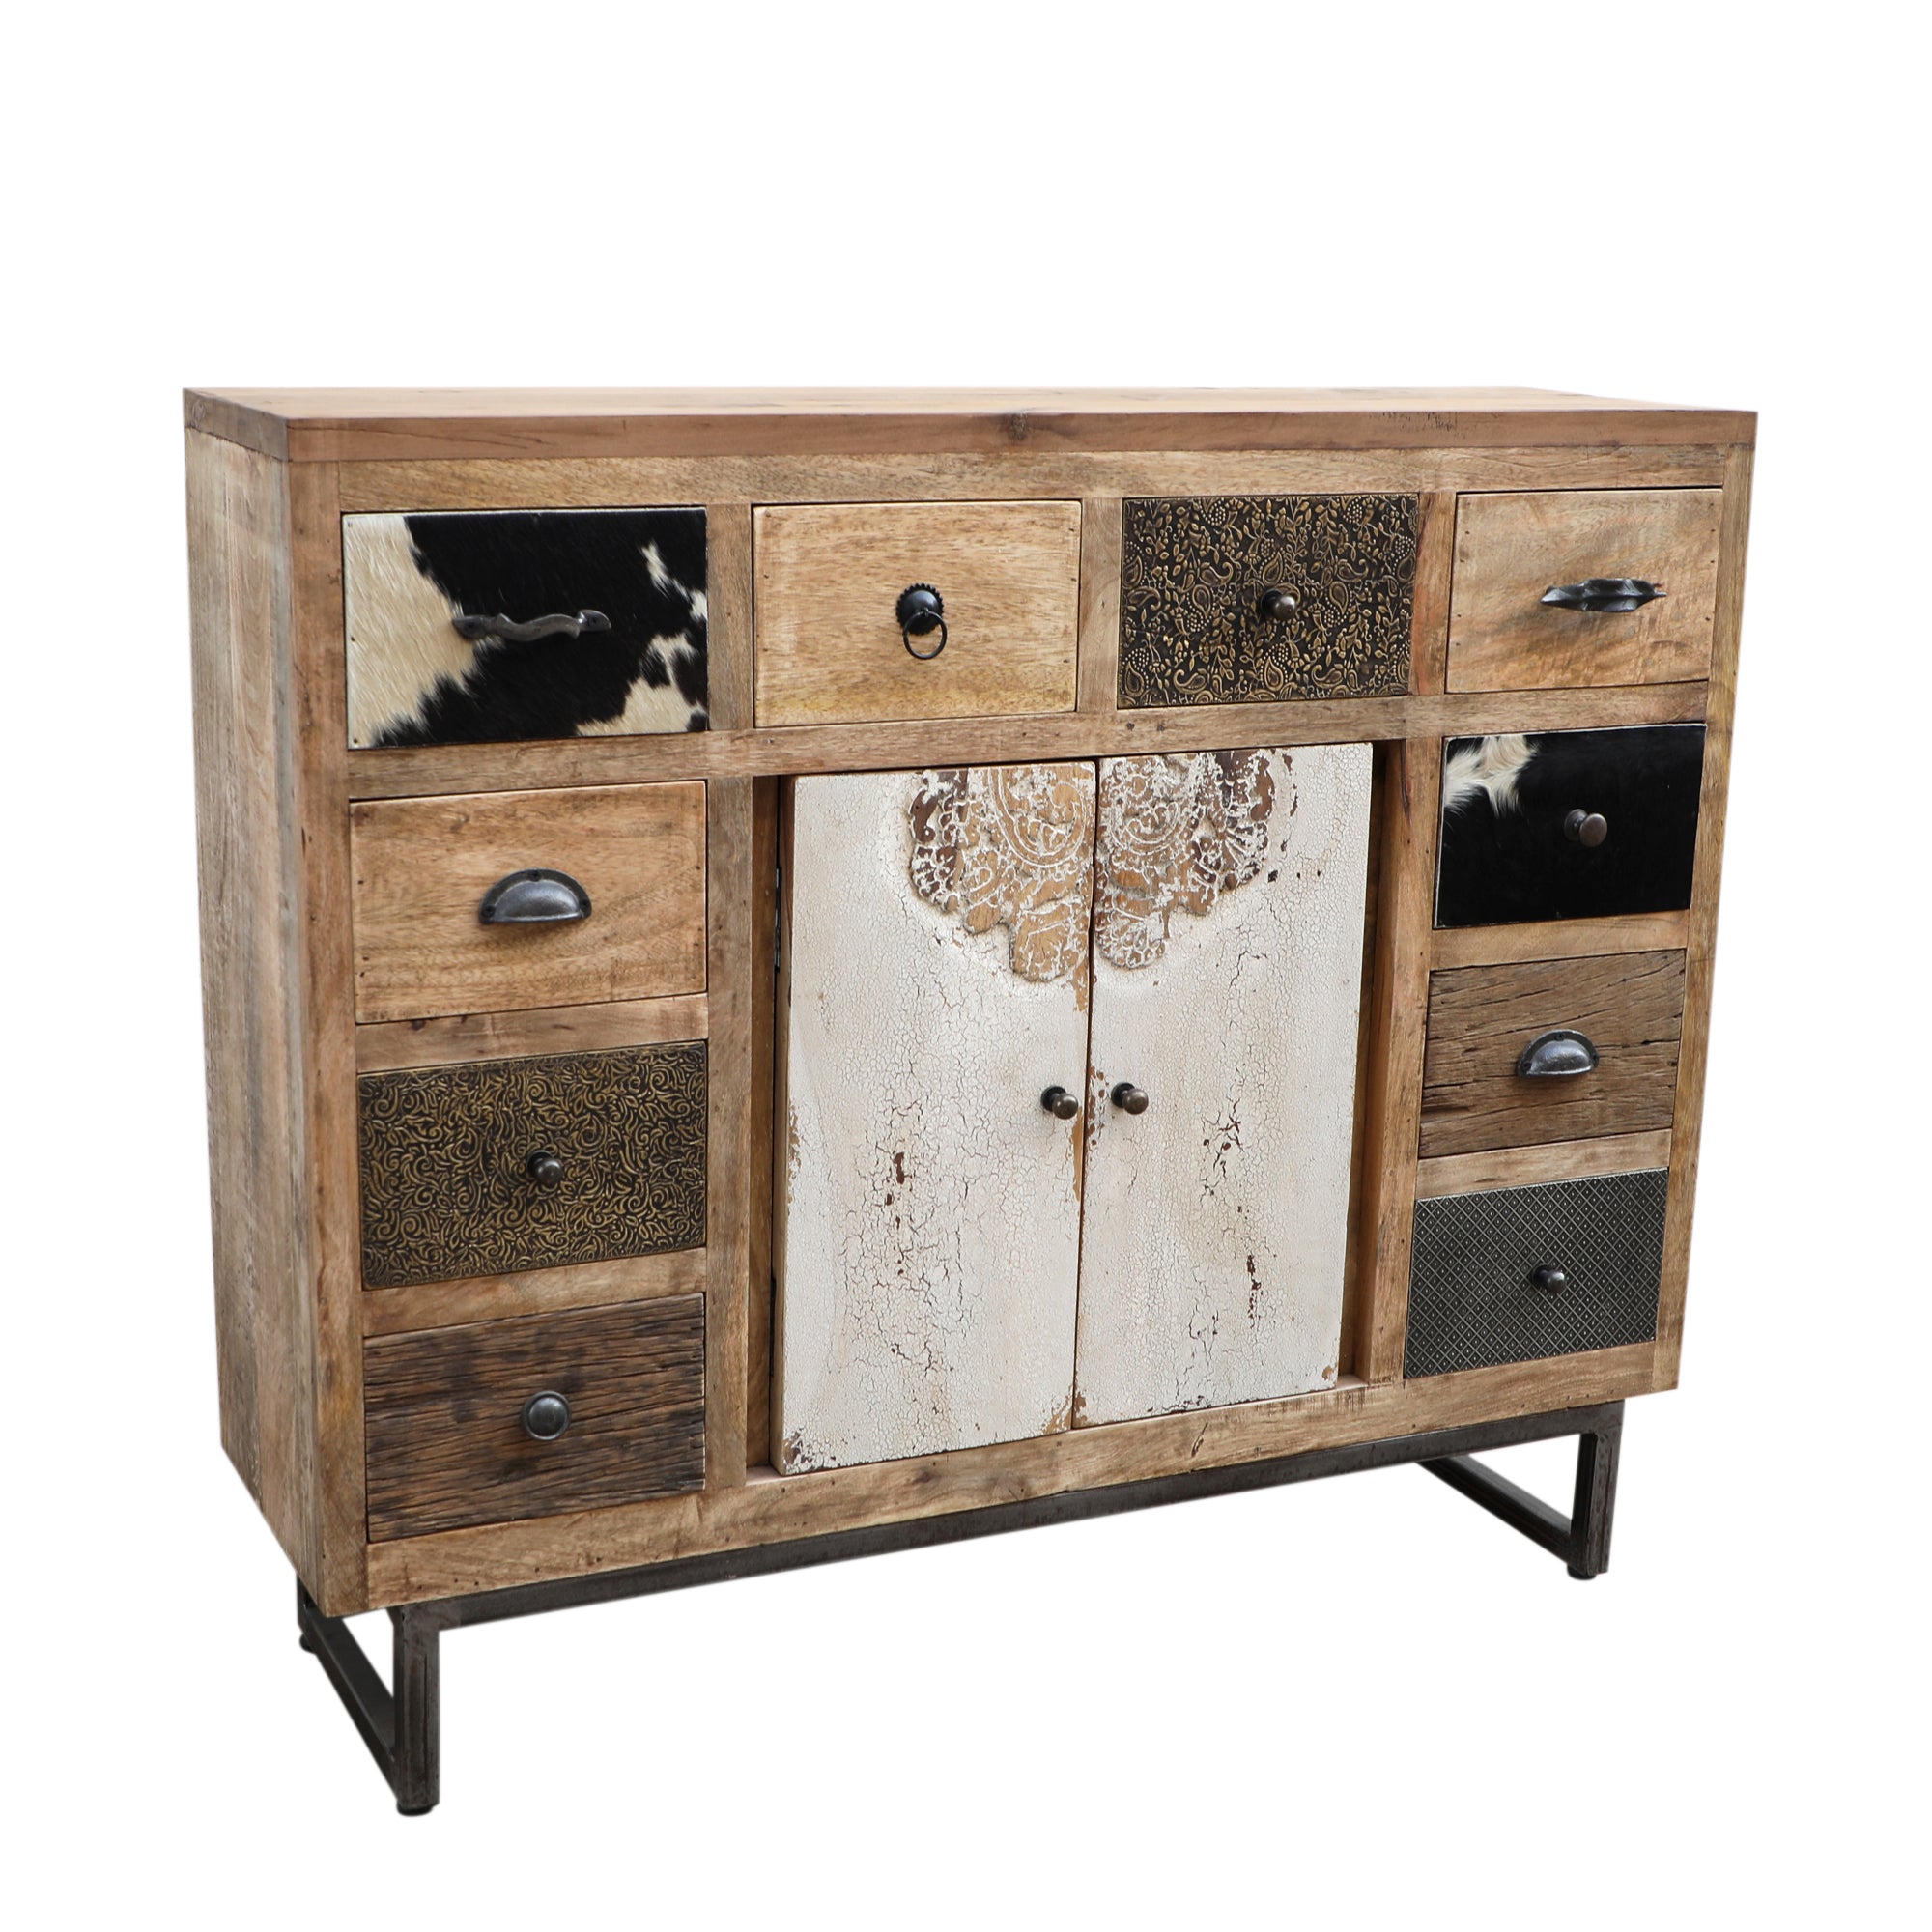 Boho Cowhide Chest Of Drawers - decorstore